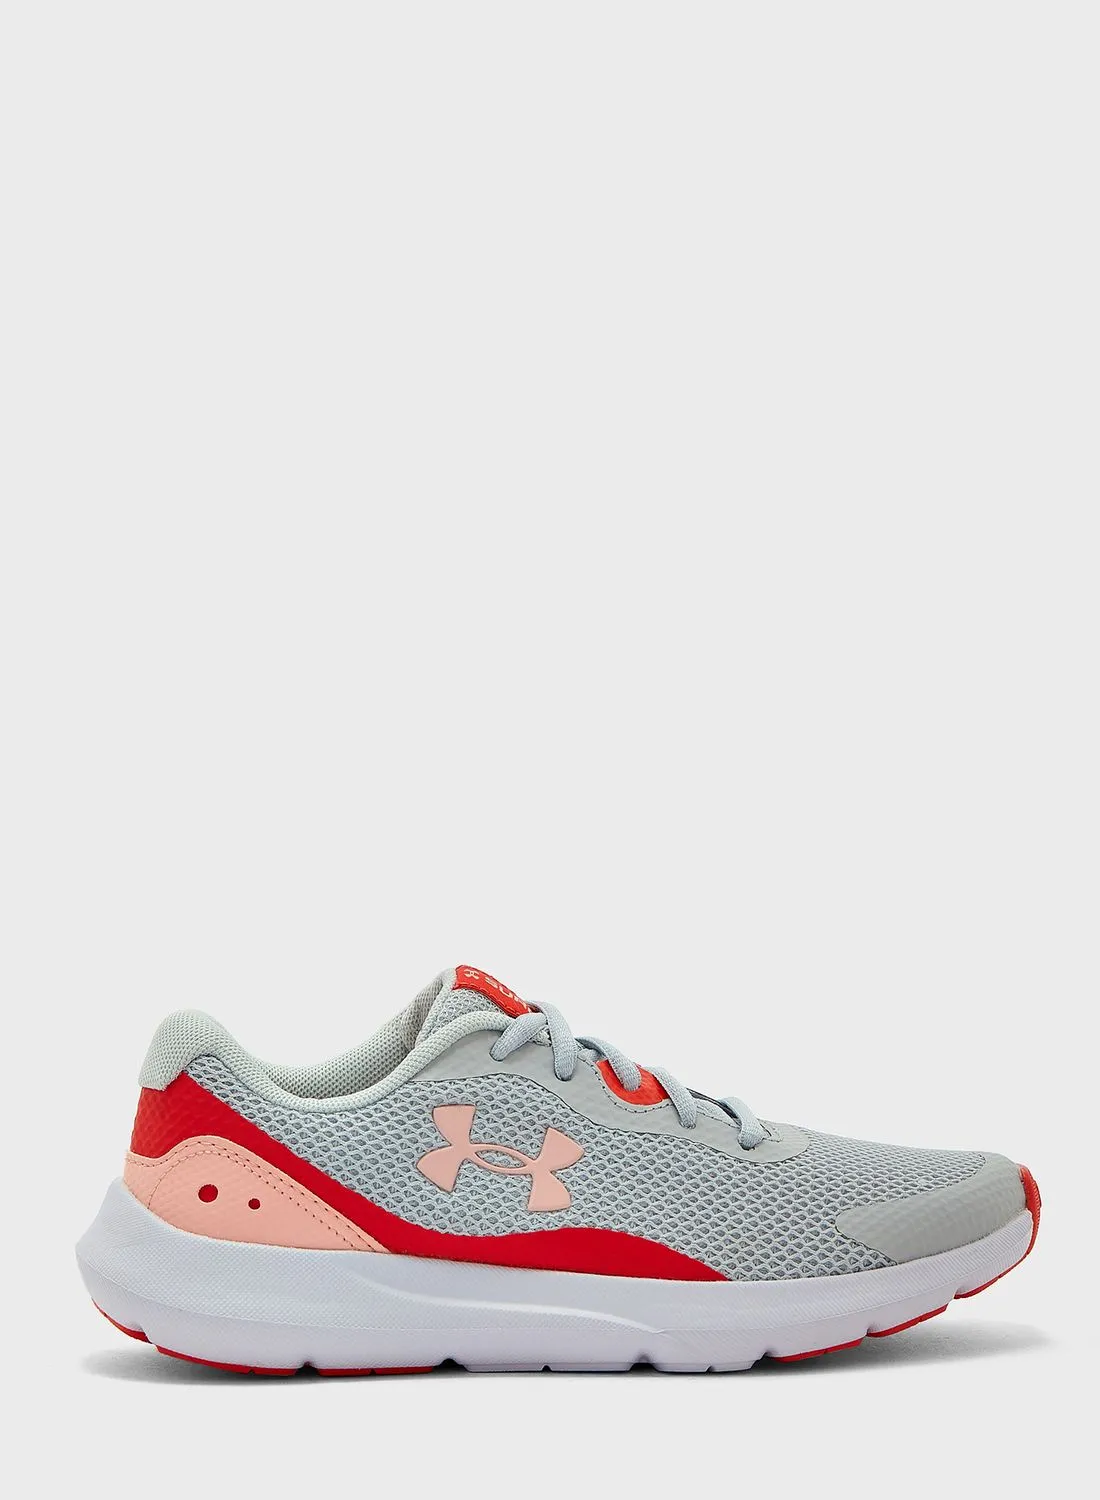 UNDER ARMOUR Youth Surge 3 Shoes